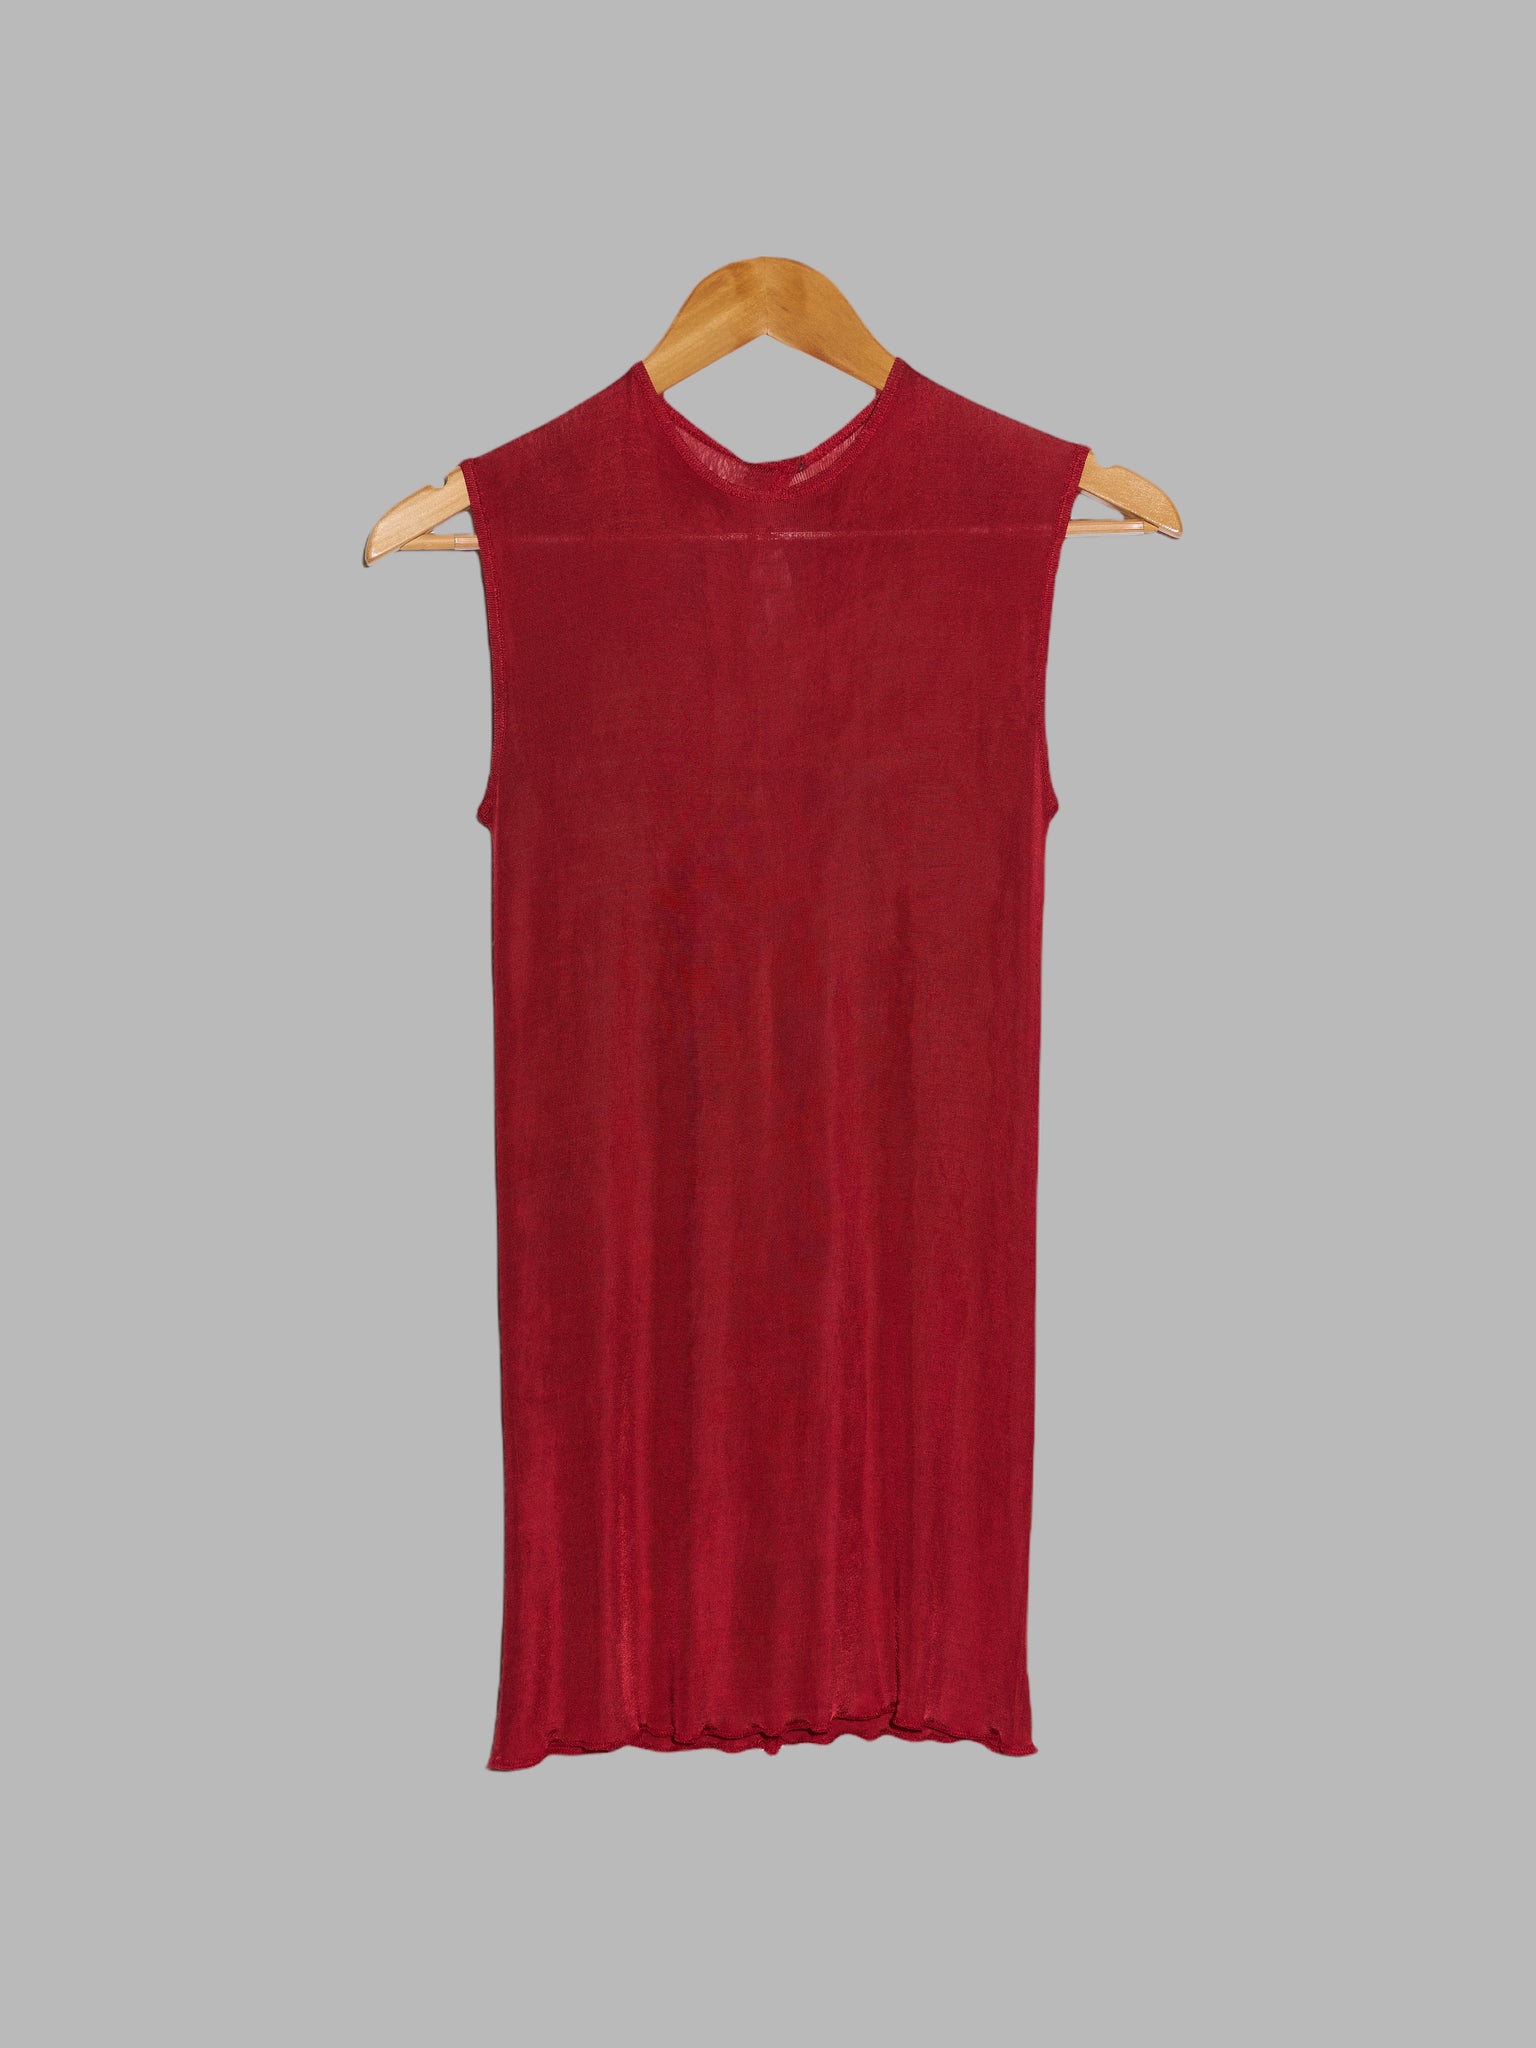 Jean Colonna shiny red sleeveless top with open back detail - S